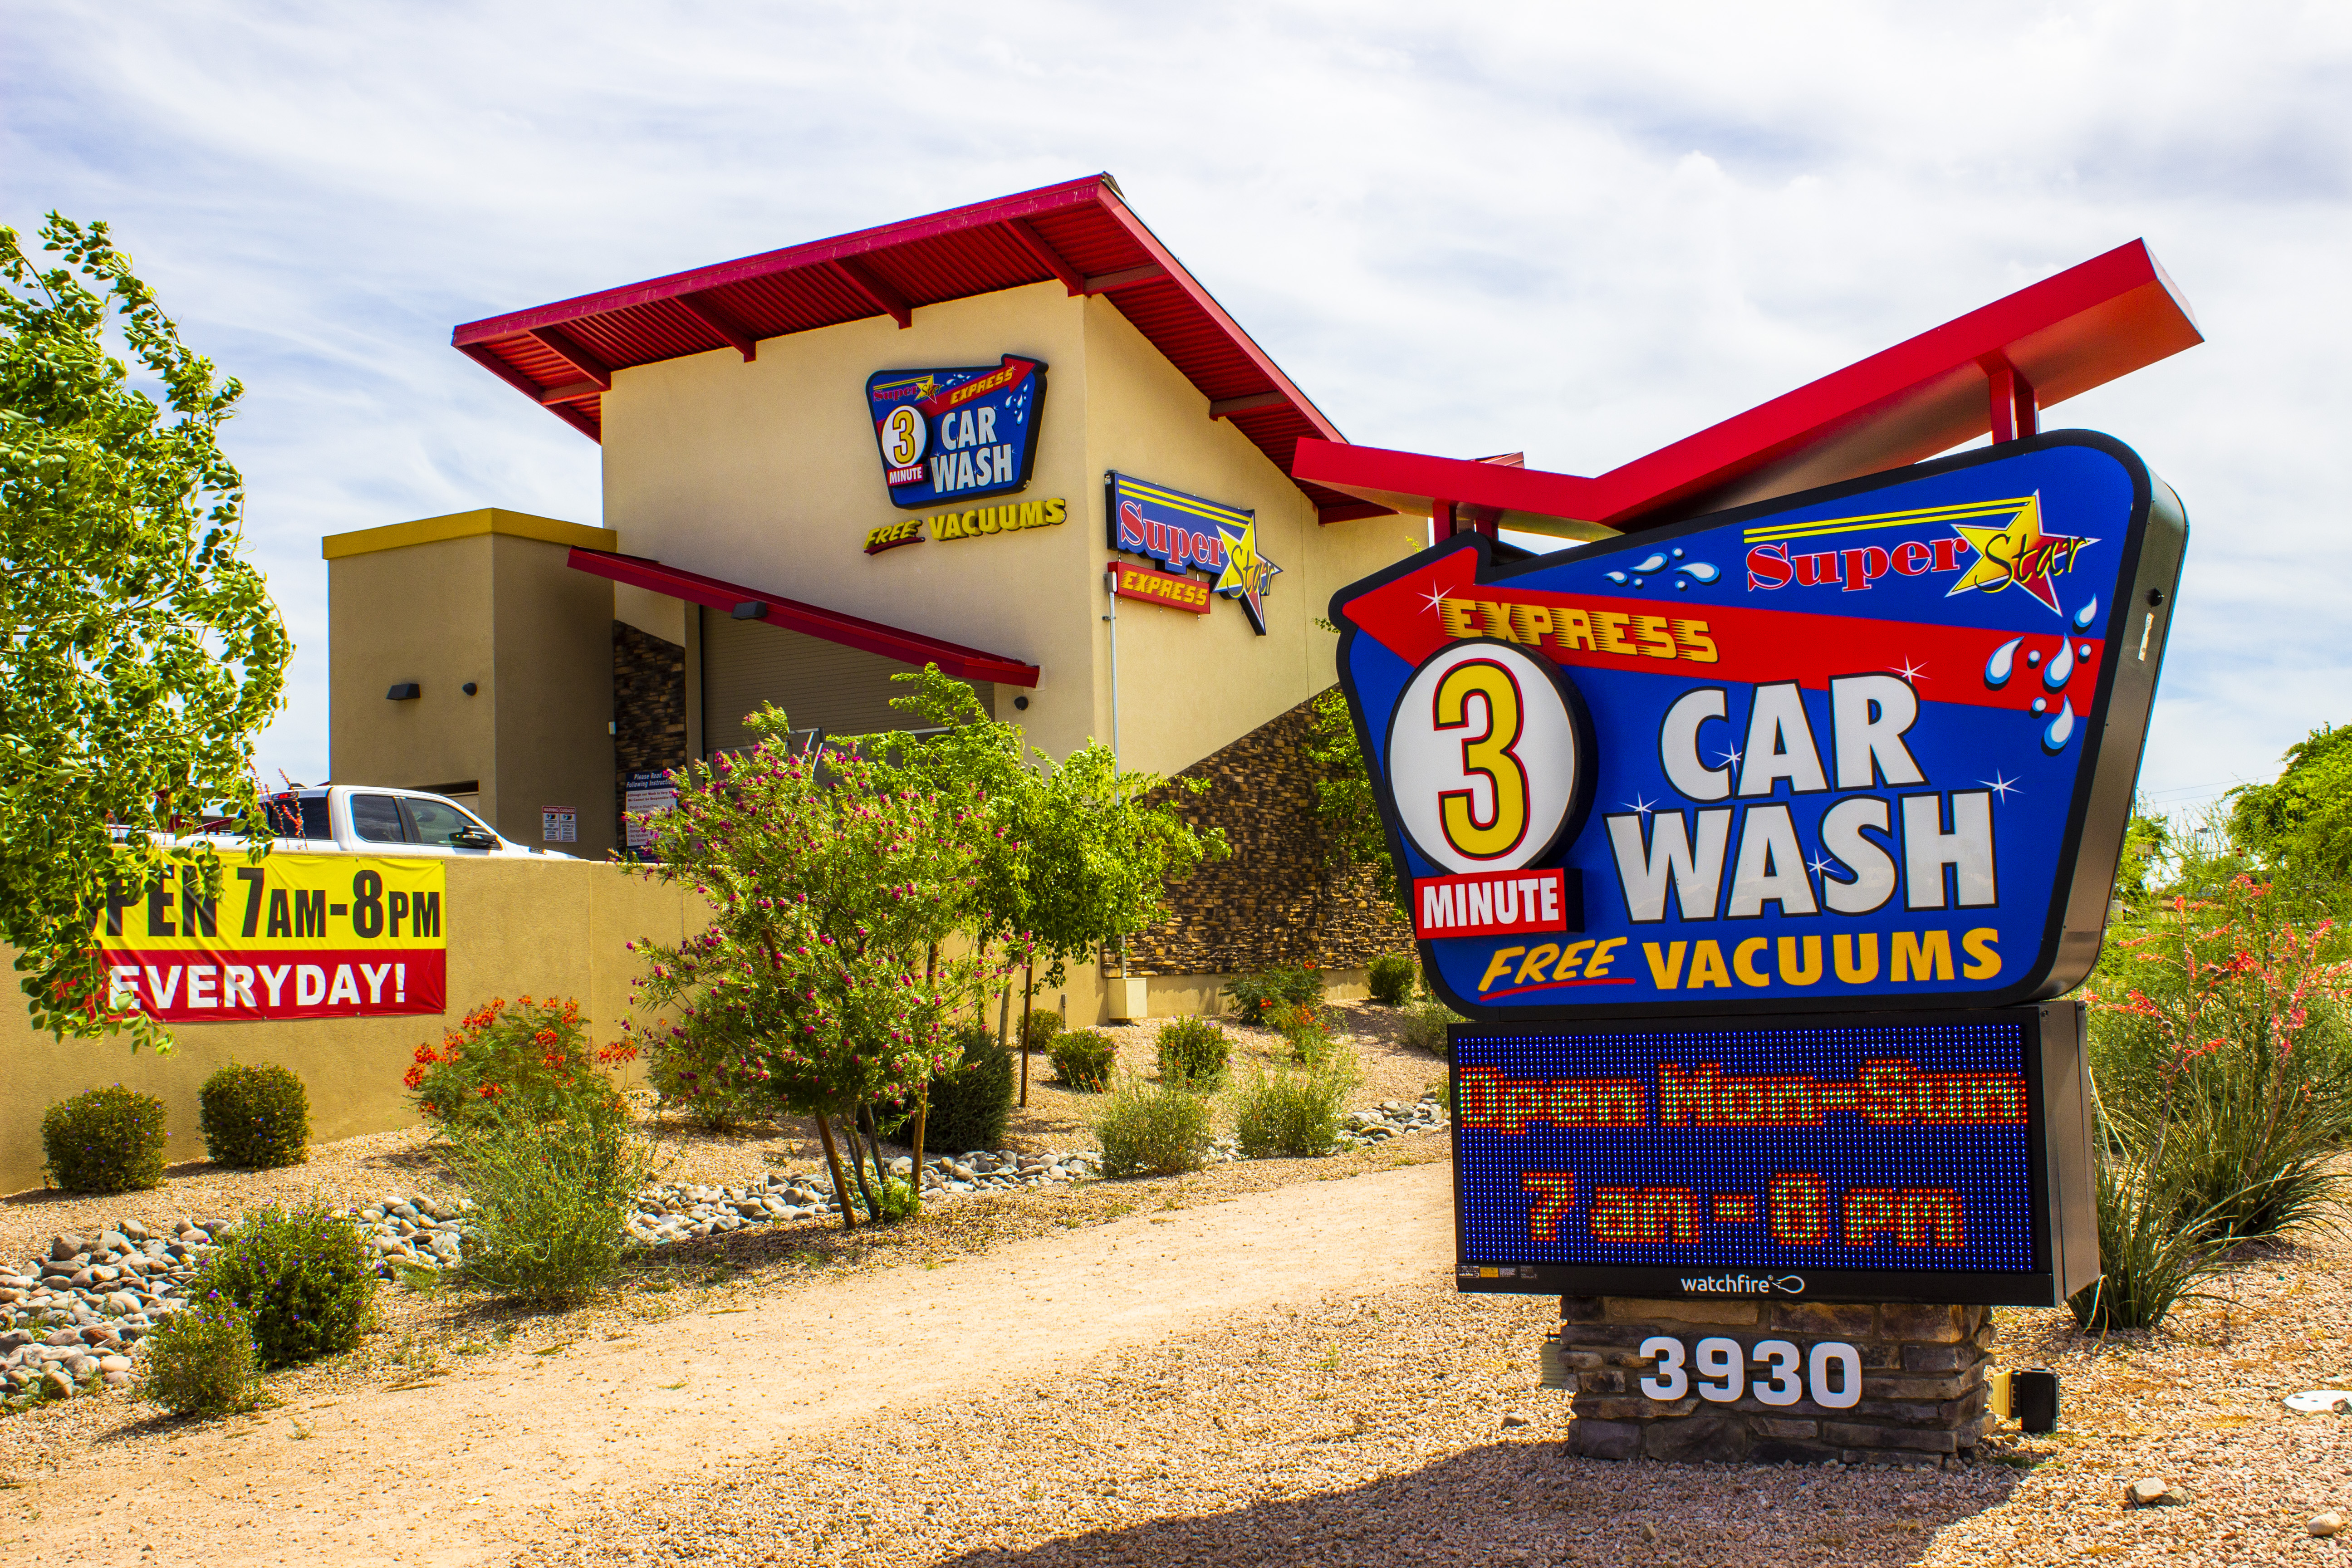 Super Star Car Wash - Hey Arlington -- We're open! Our newest